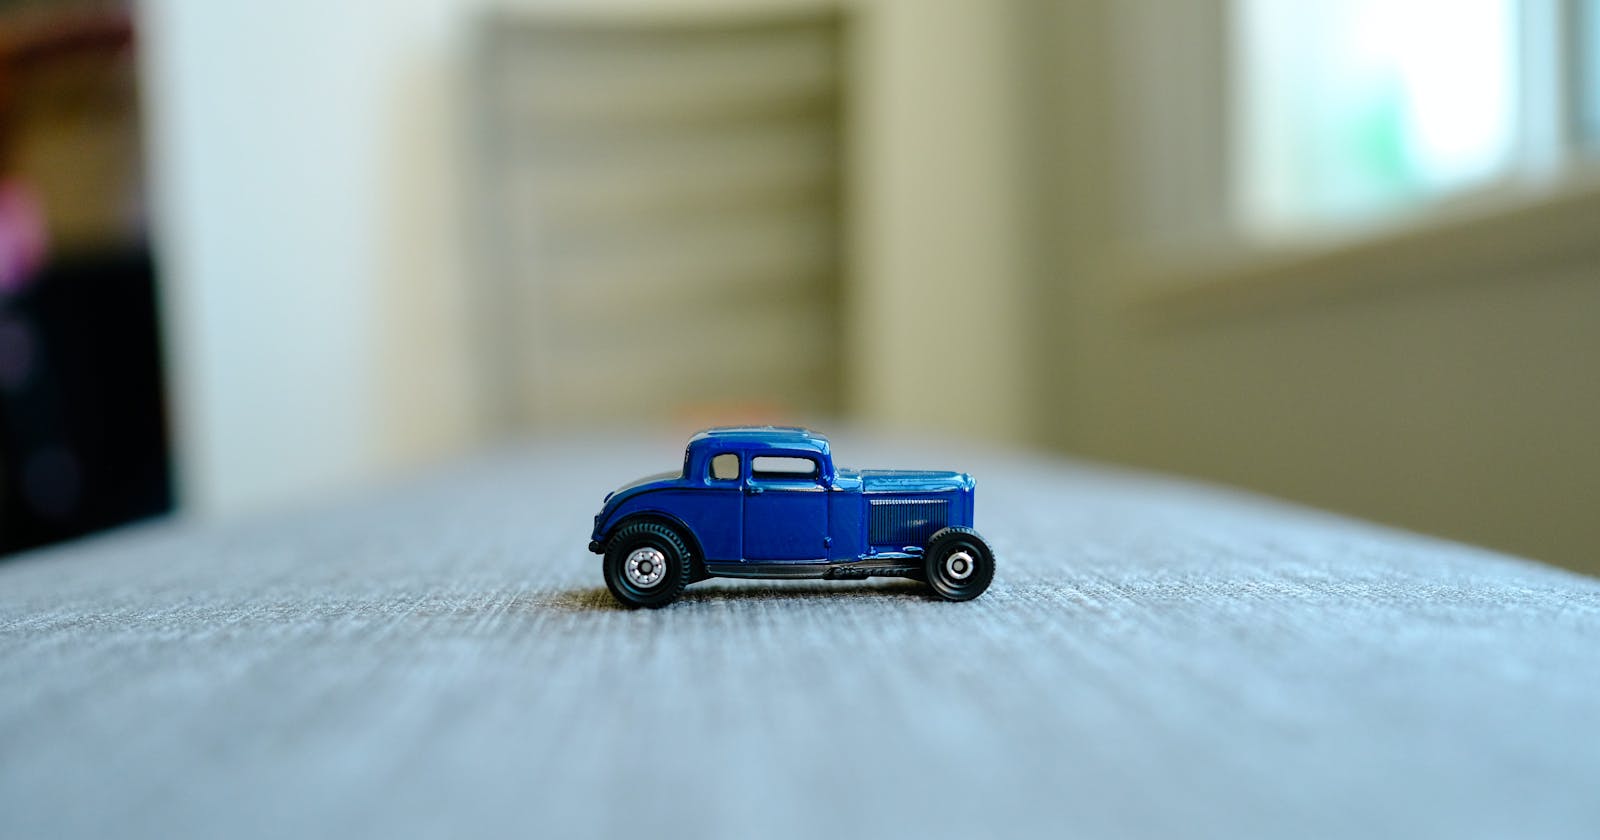 Toy Cars and User Experience Design